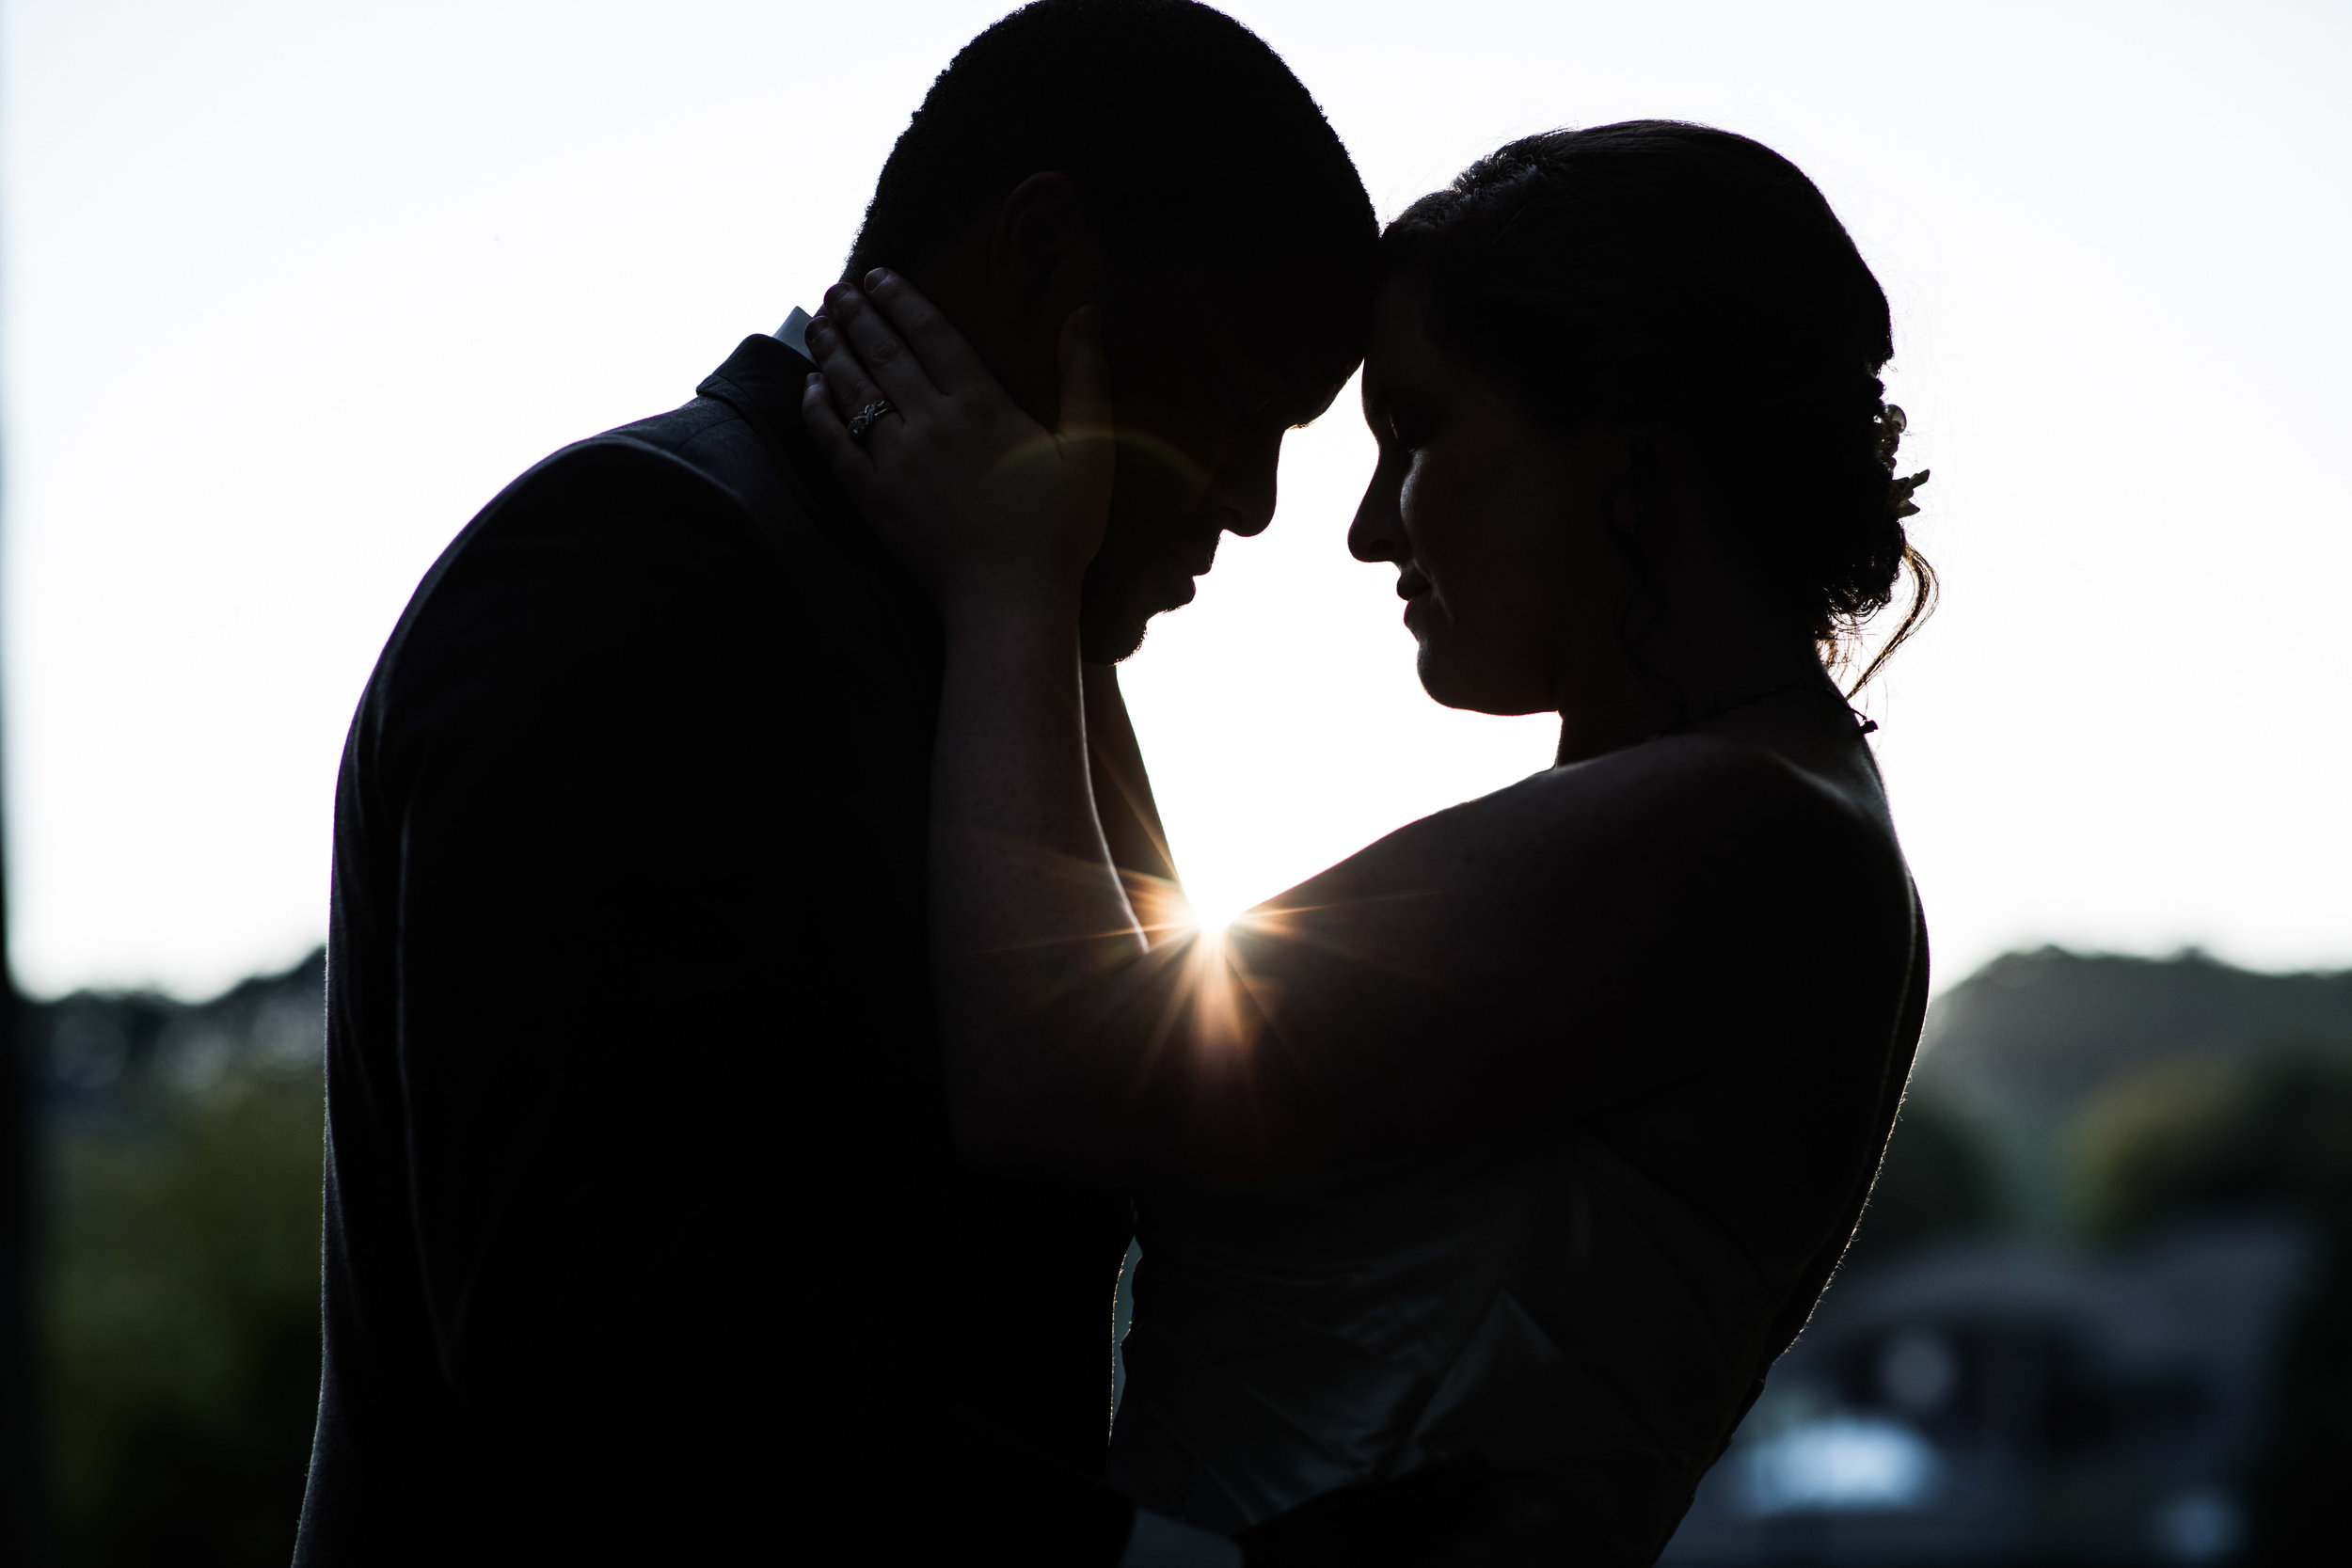  dramatic silhouette of bride and groom holding each other as the setting sun shines through between them 